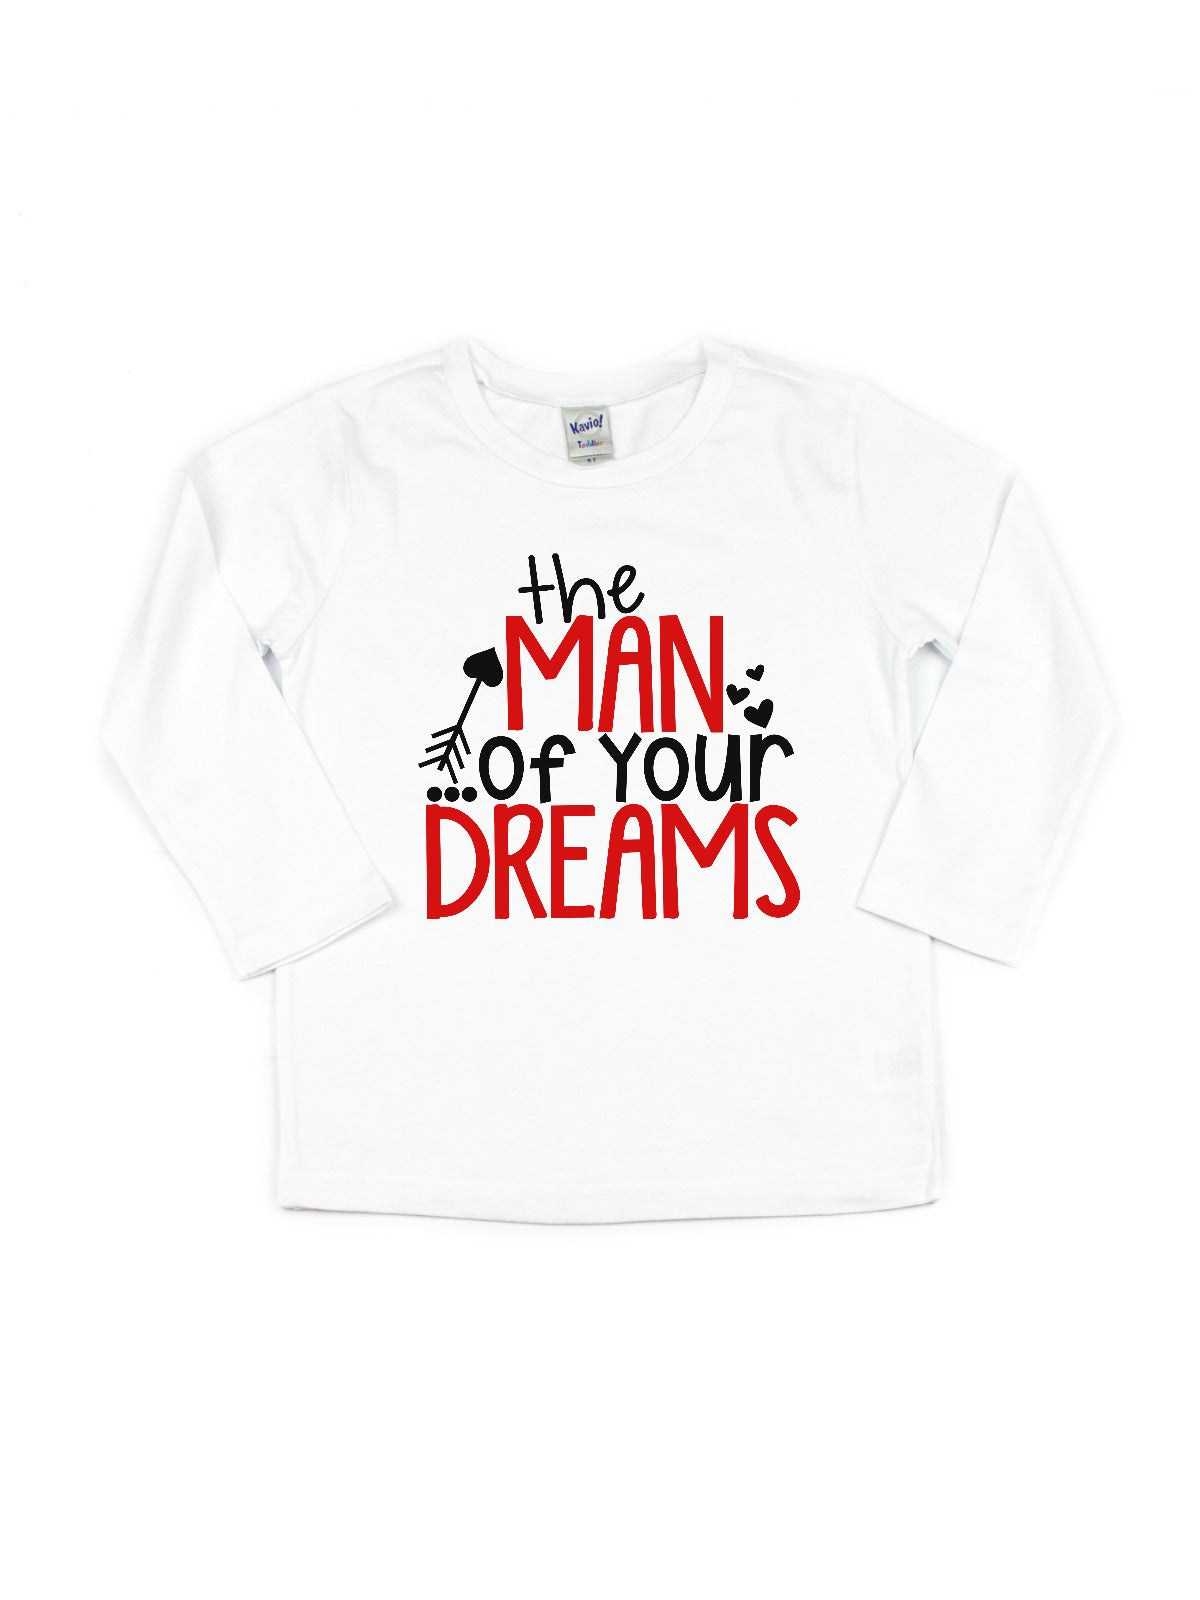 The Man of Your Dreams Boys Valentine's Day Shirt